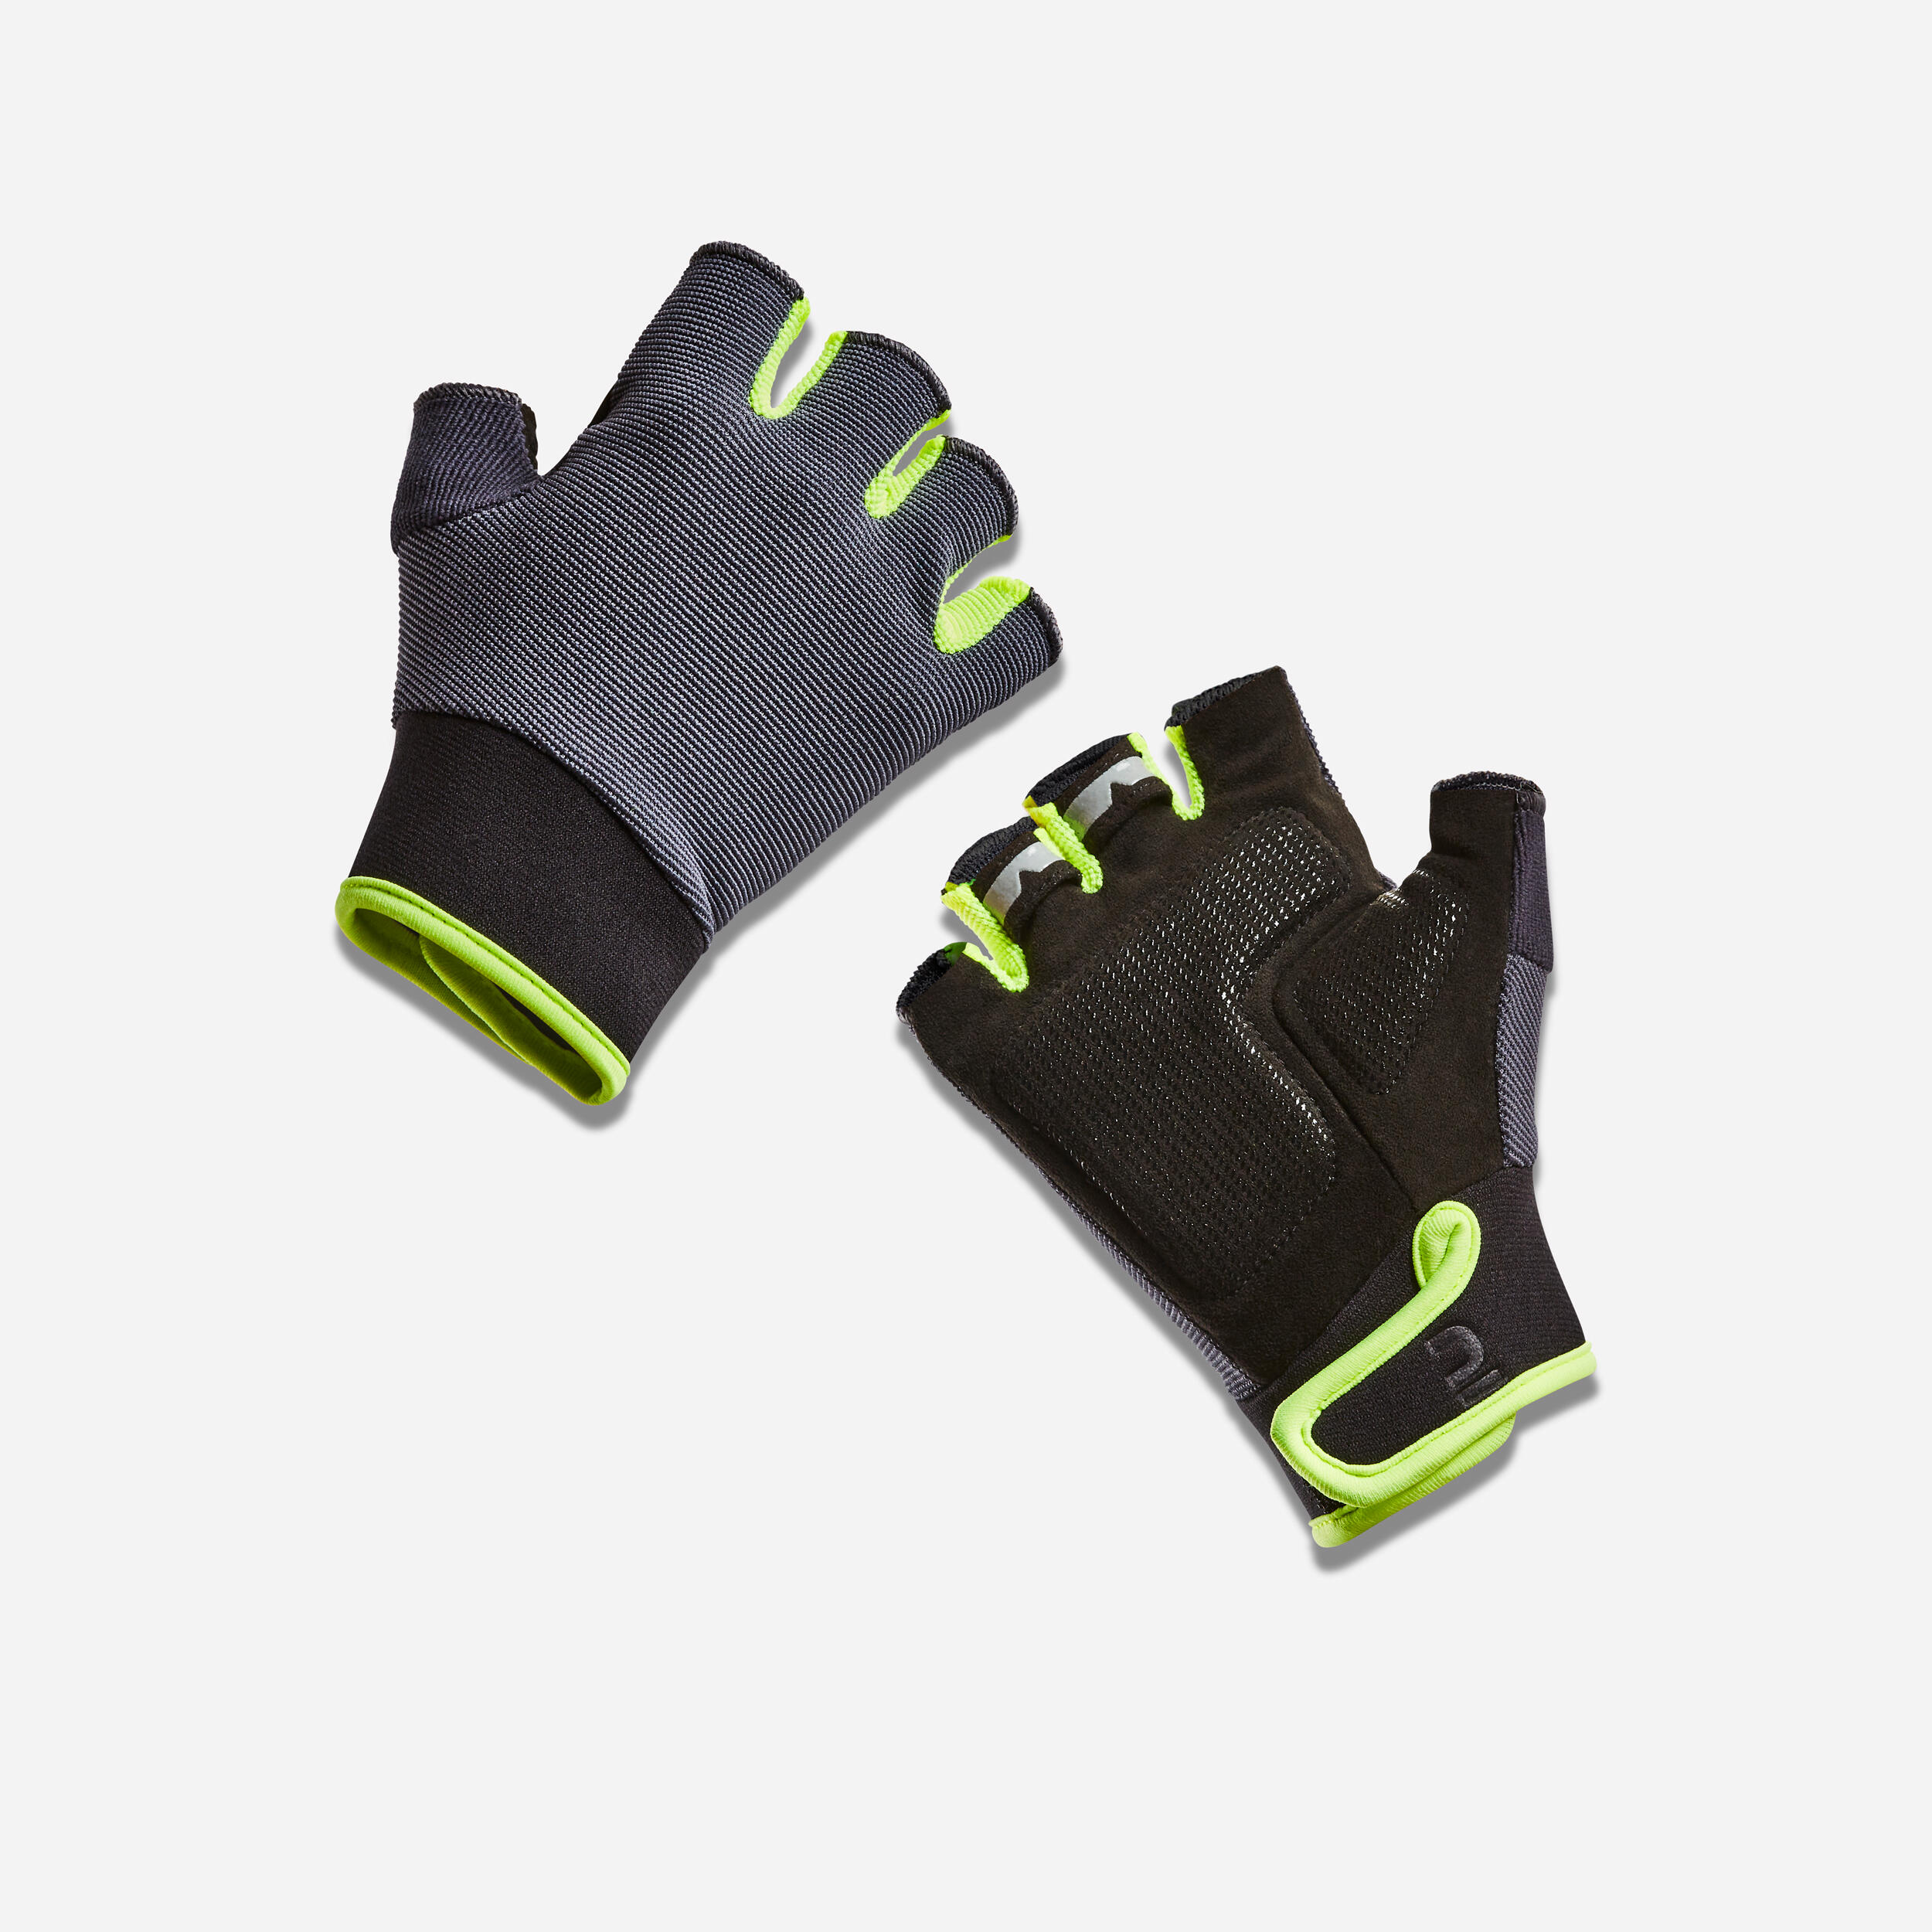 Kids' Cycling Gloves 500 - Black / Yellow BTWIN